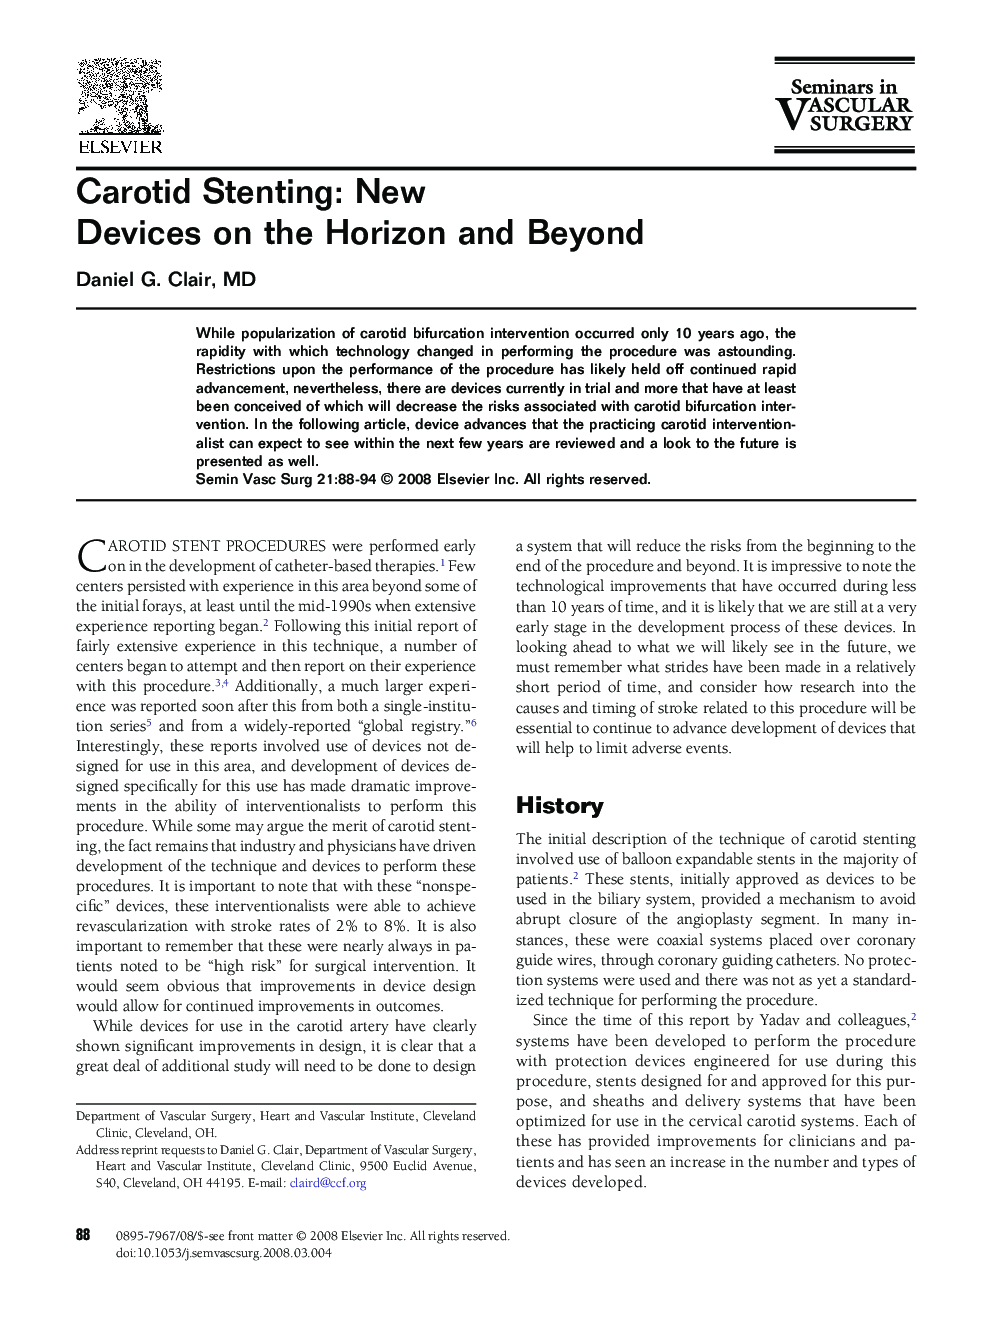 Carotid Stenting: New Devices on the Horizon and Beyond